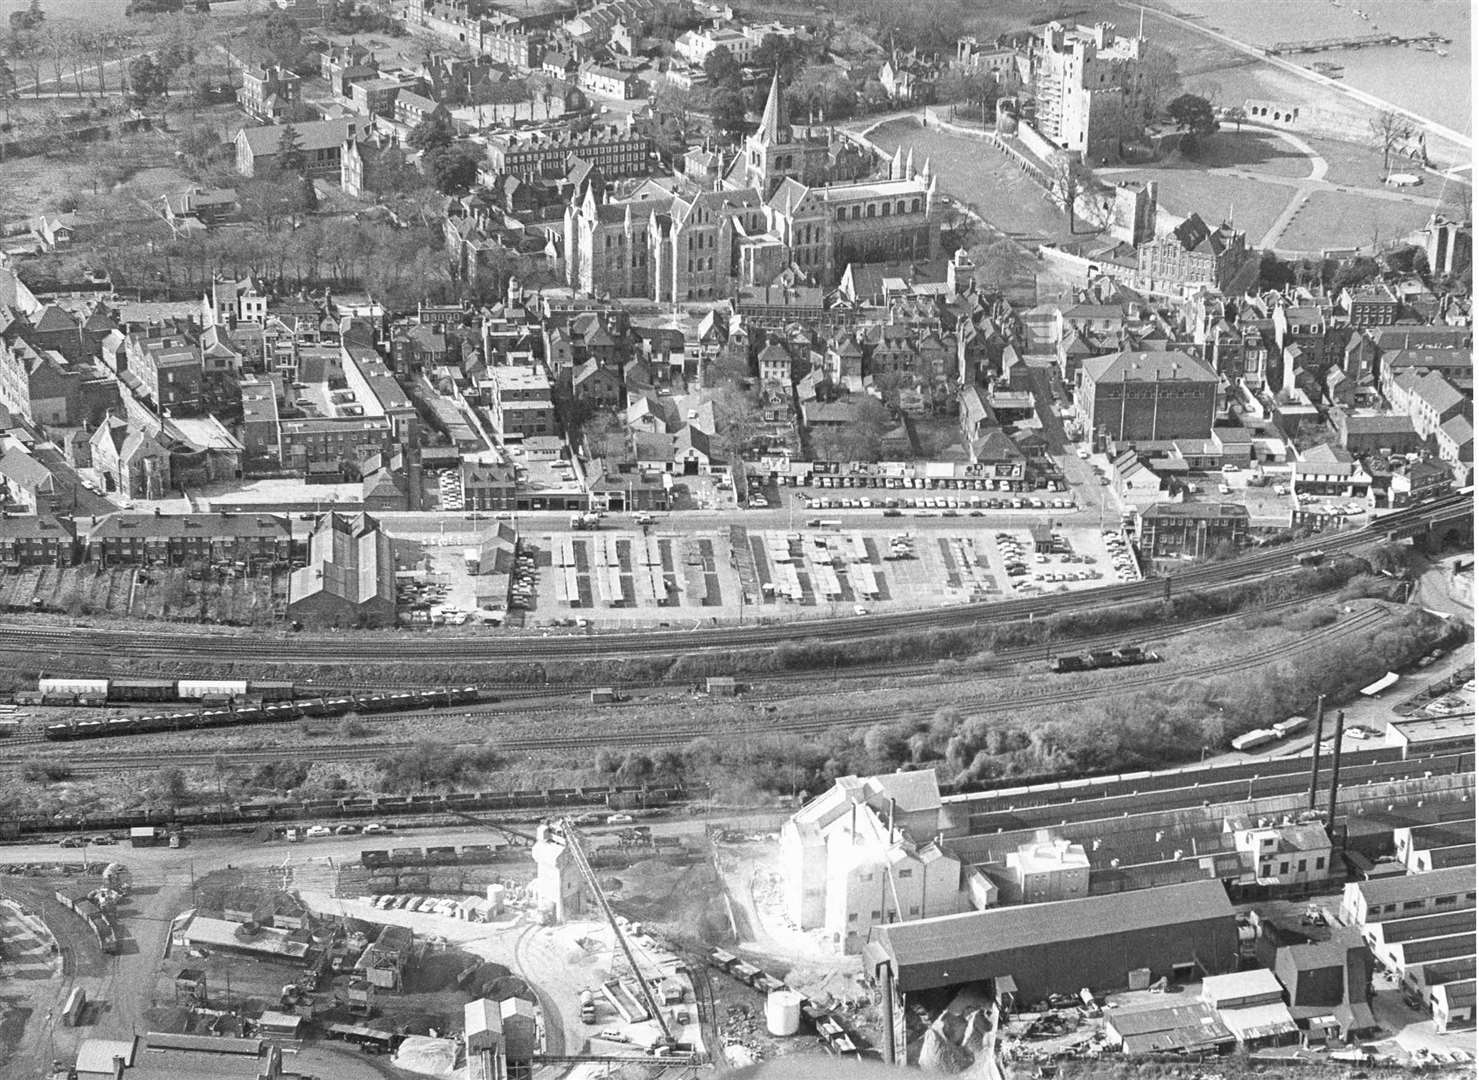 The city pictured in 1970. Rochester's historic Sweeps festival dates back more than 300 years to when children were used as chimney sweeps and would be given an annual holiday on May 1. It ceased in the early 1900s but was revived in 1981 by Gordon Newton. The much-anticipated annual festival still draws in thousands